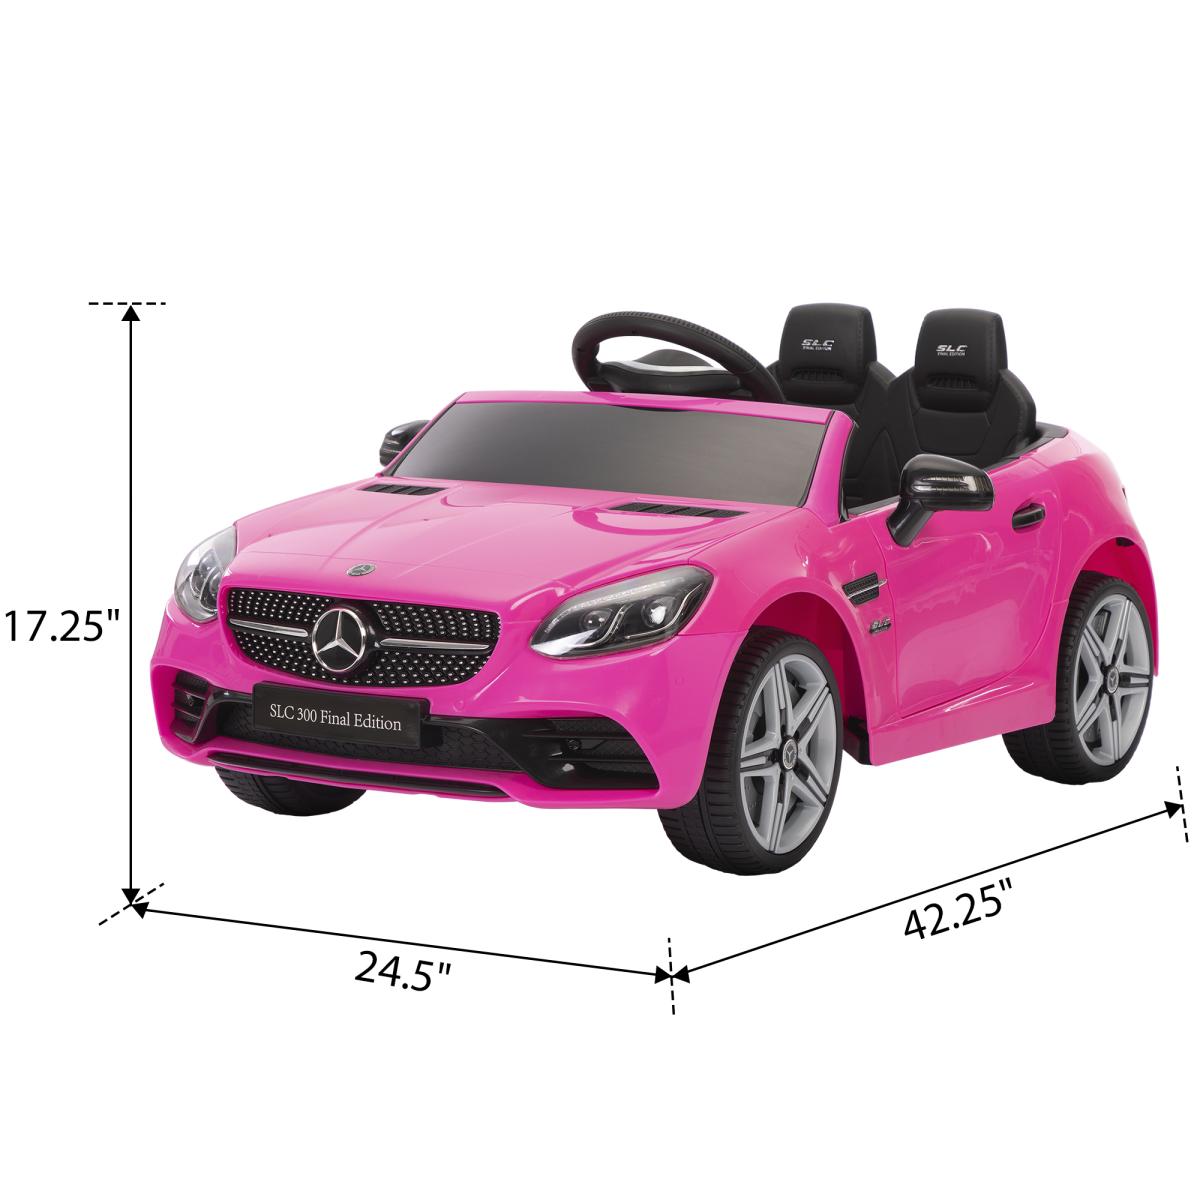 12V Kids Slc300 Ride On Toy Car, Electric Battery Powered Vehicles with Led Lights, Horn, for Children 3-6